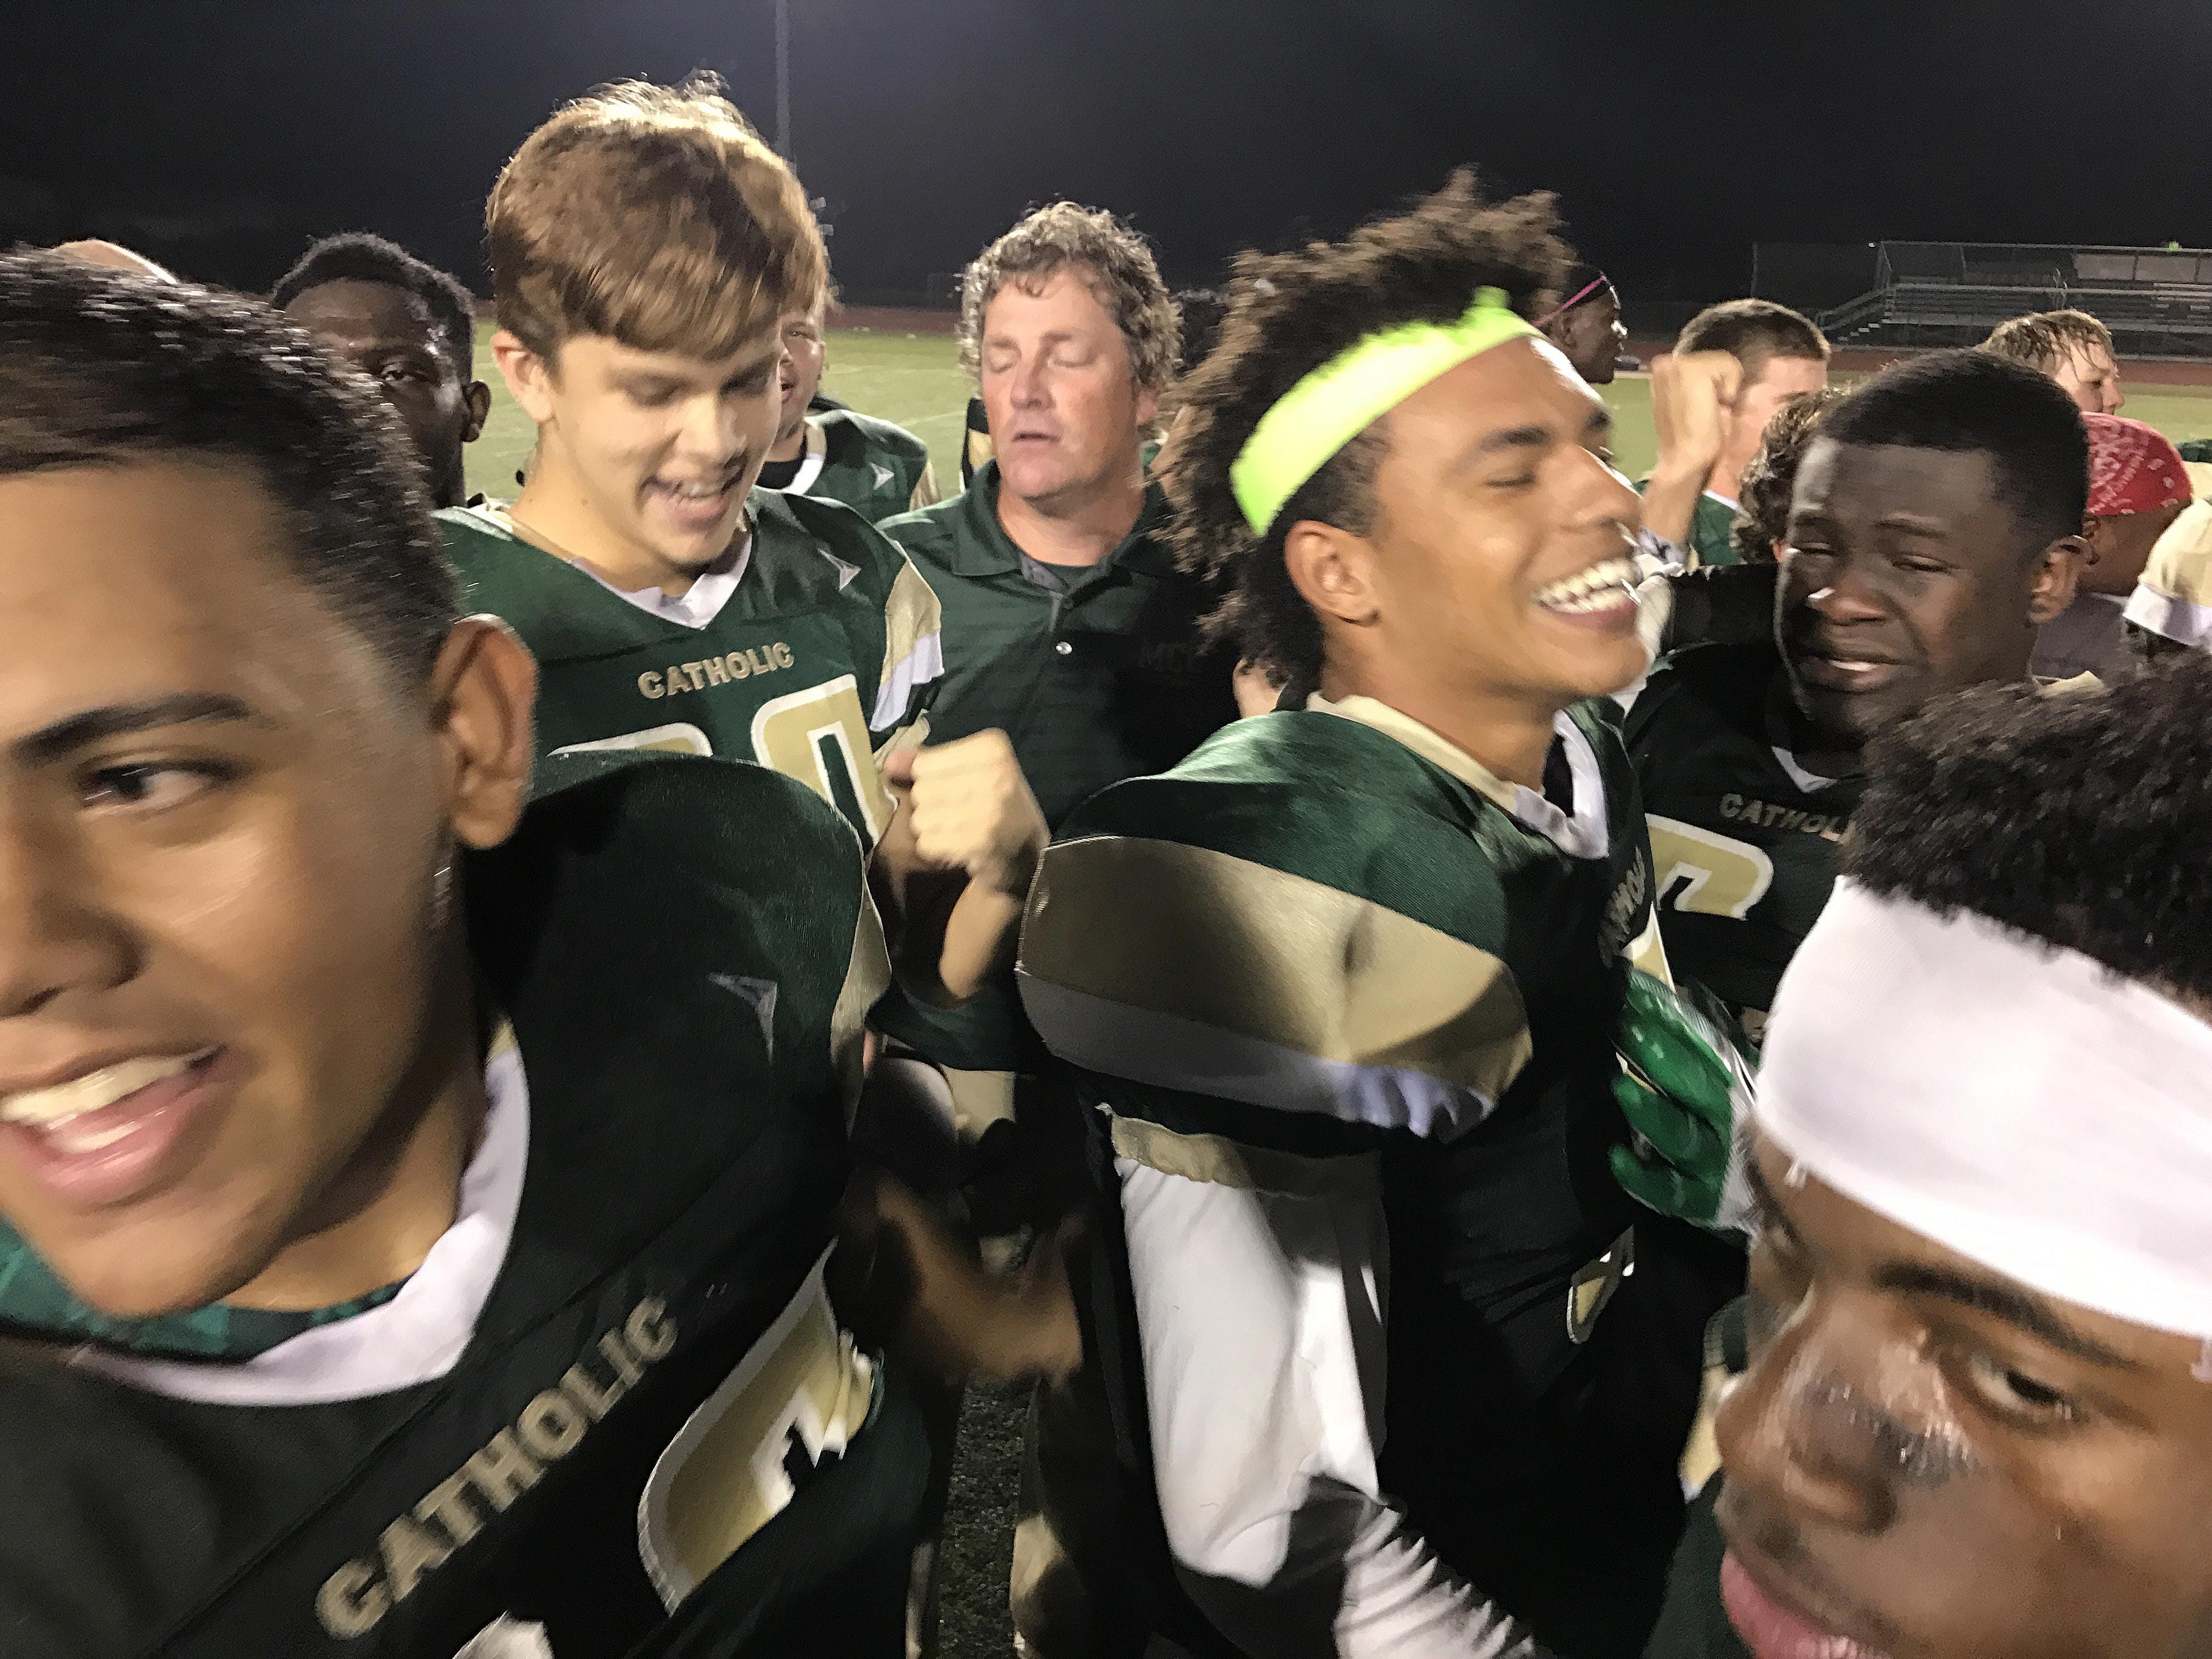 Melbourne Central Catholic players celebrate their nine-overtime victory over Clearwater Central Catholic.